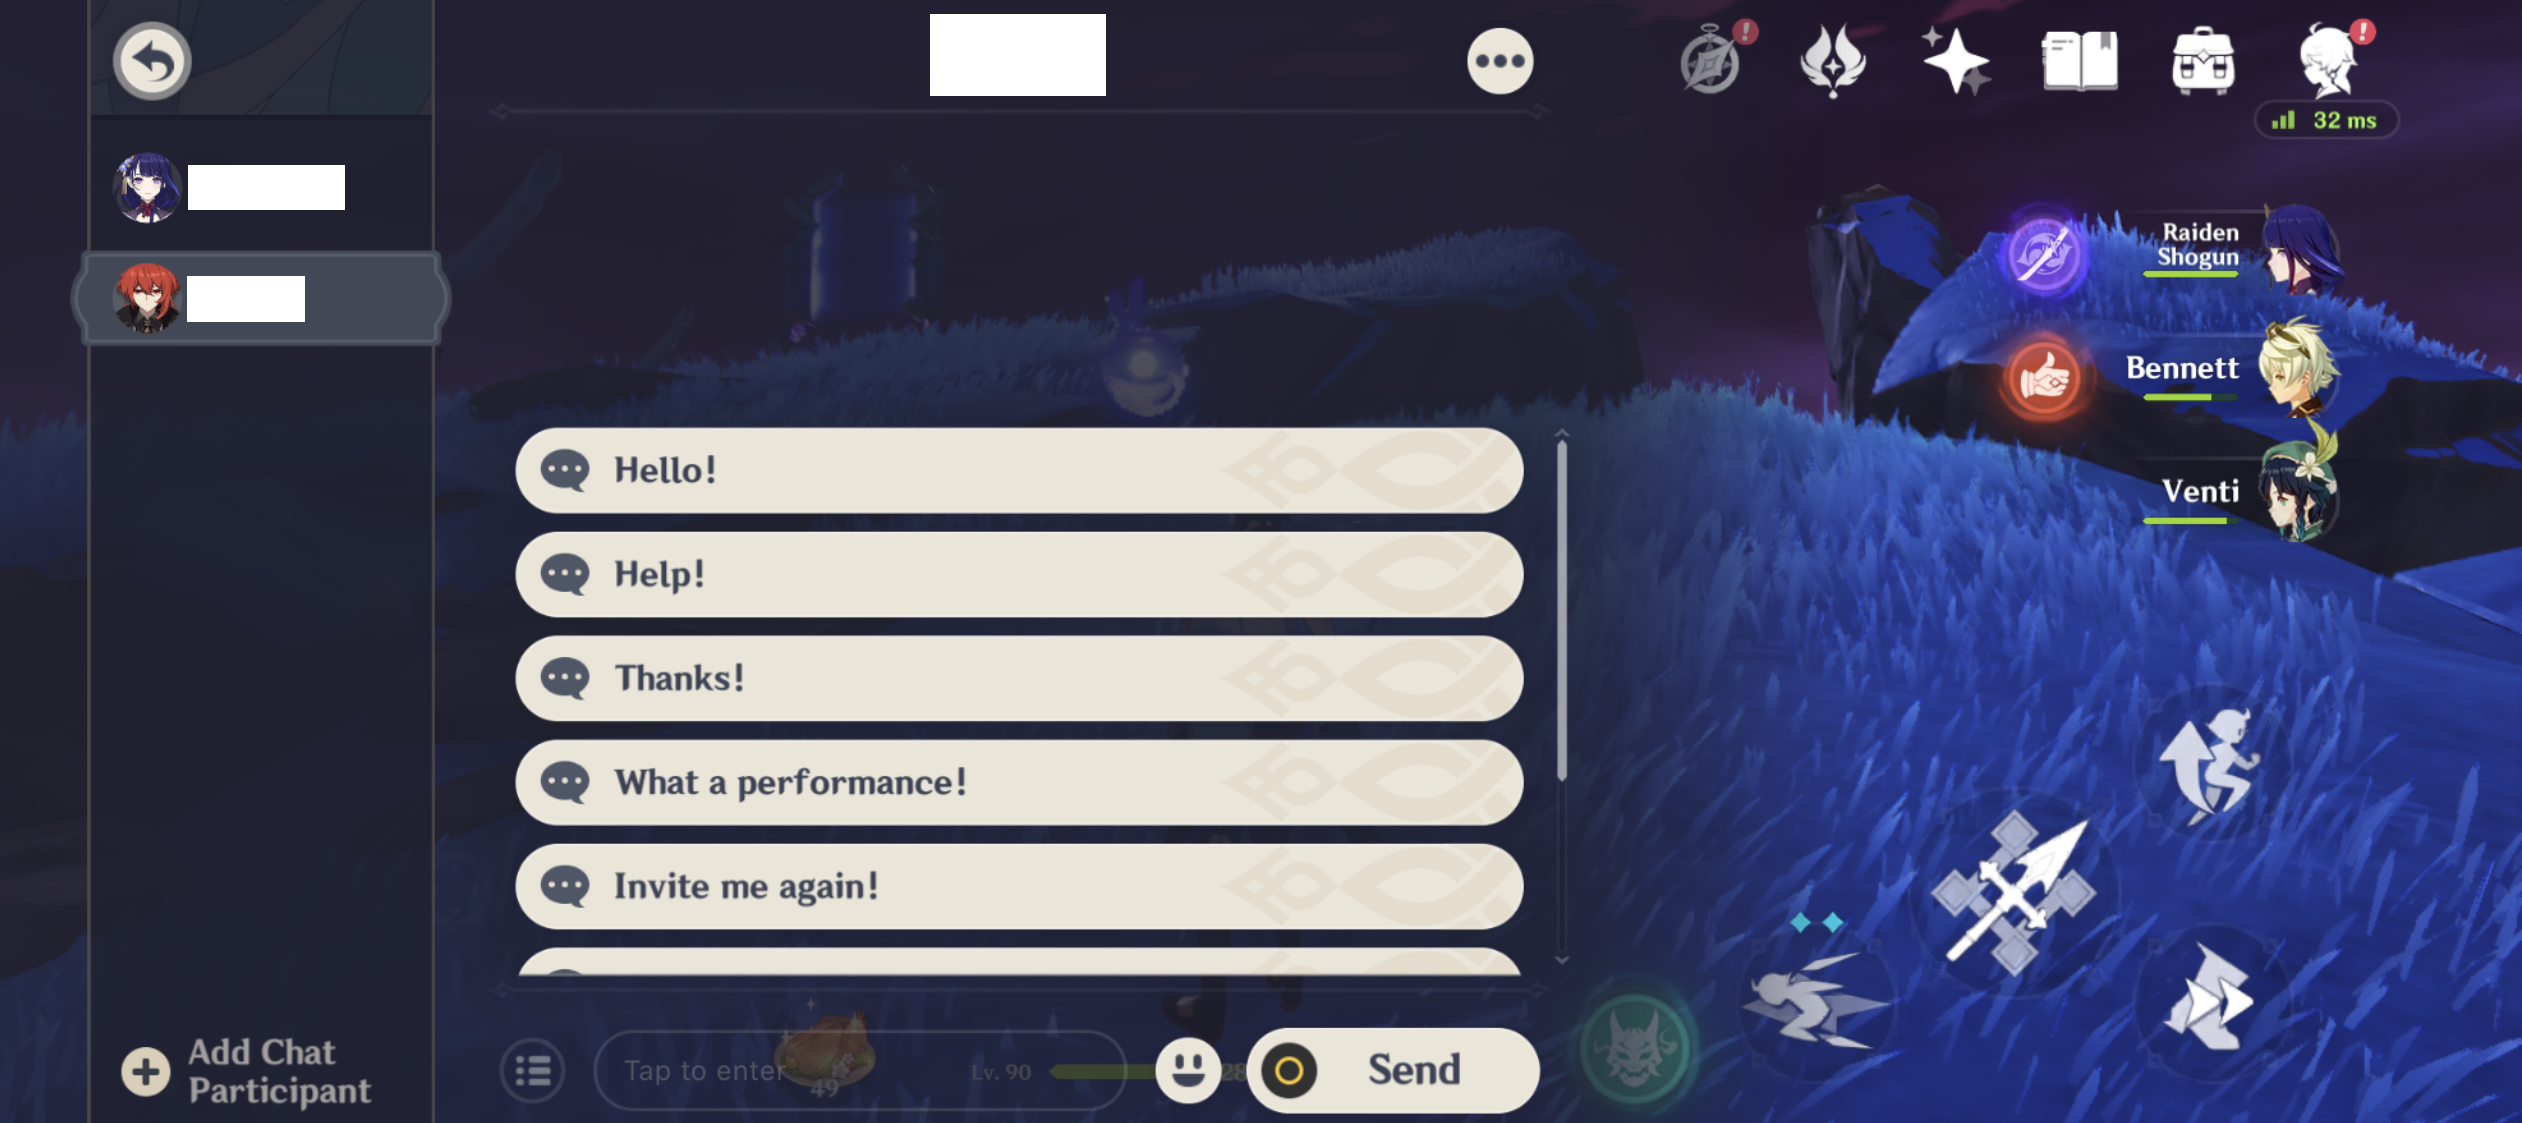 Guild chat disable Messaging and